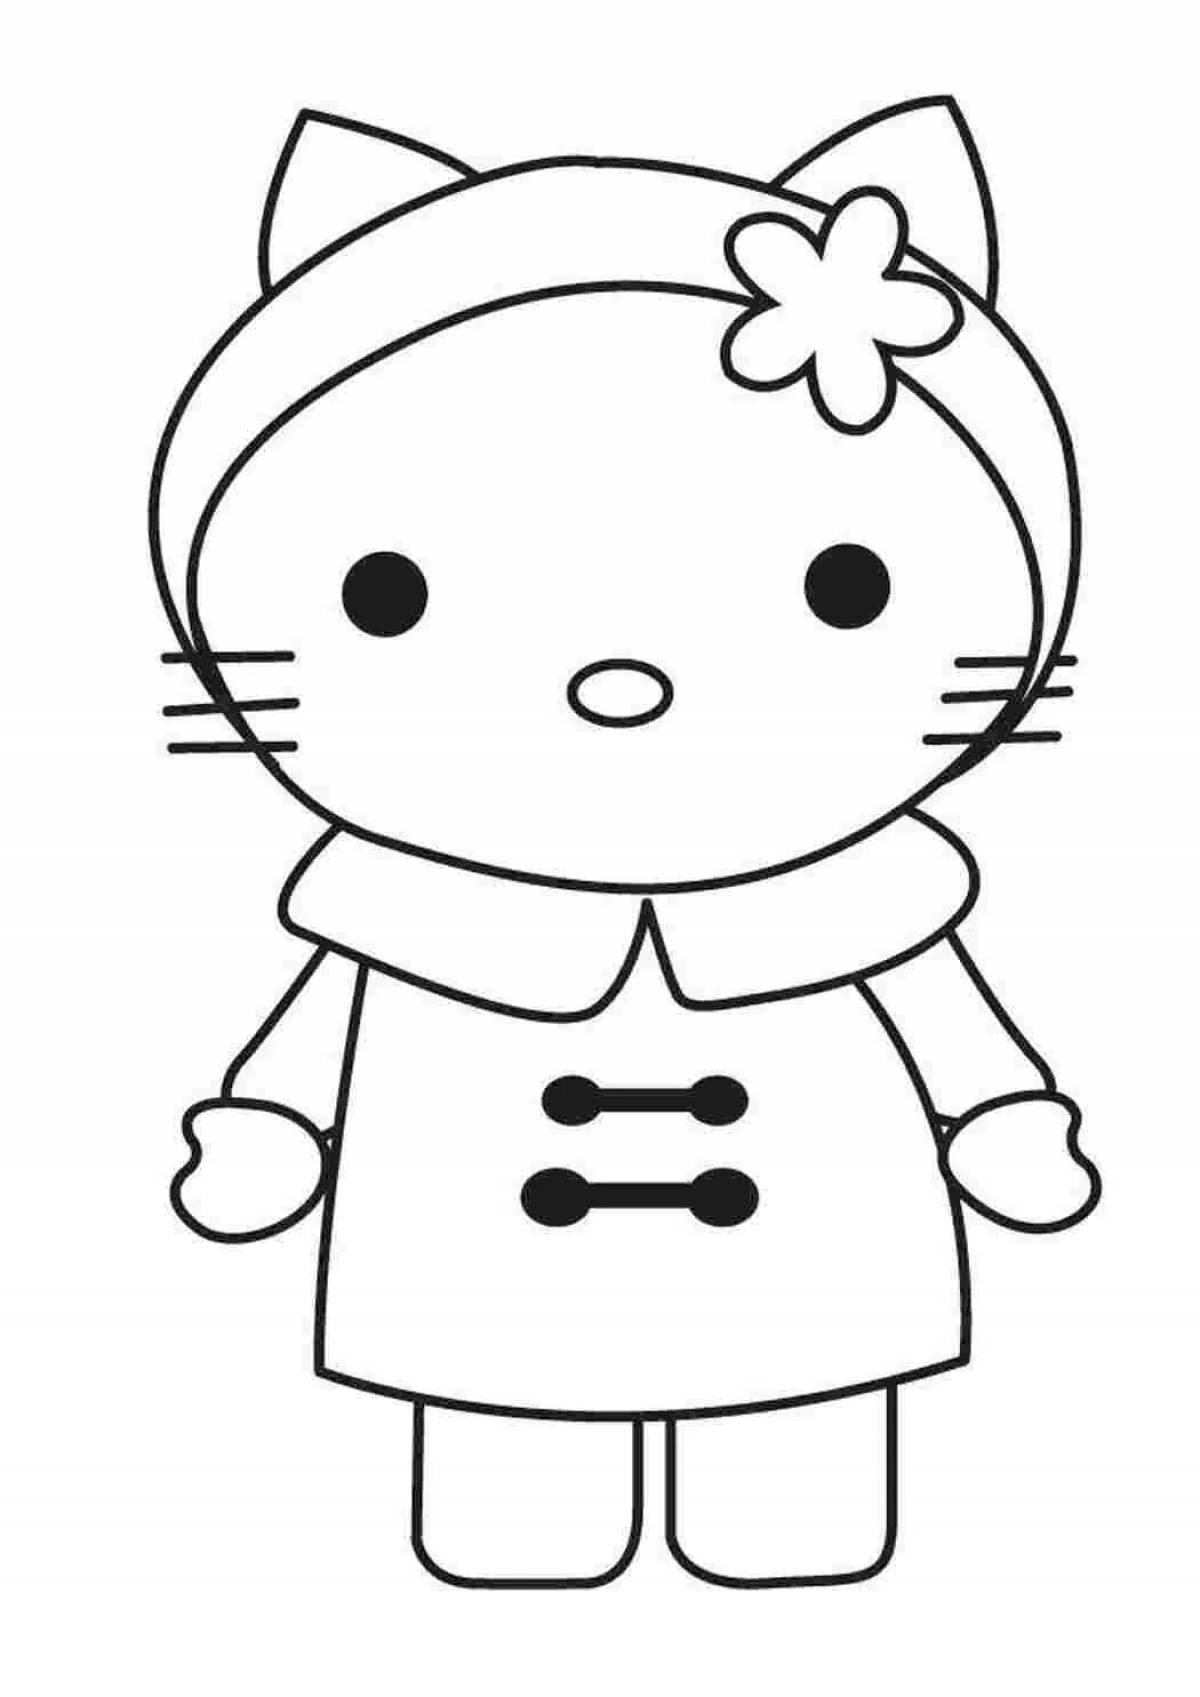 Awesome cat lily coloring page